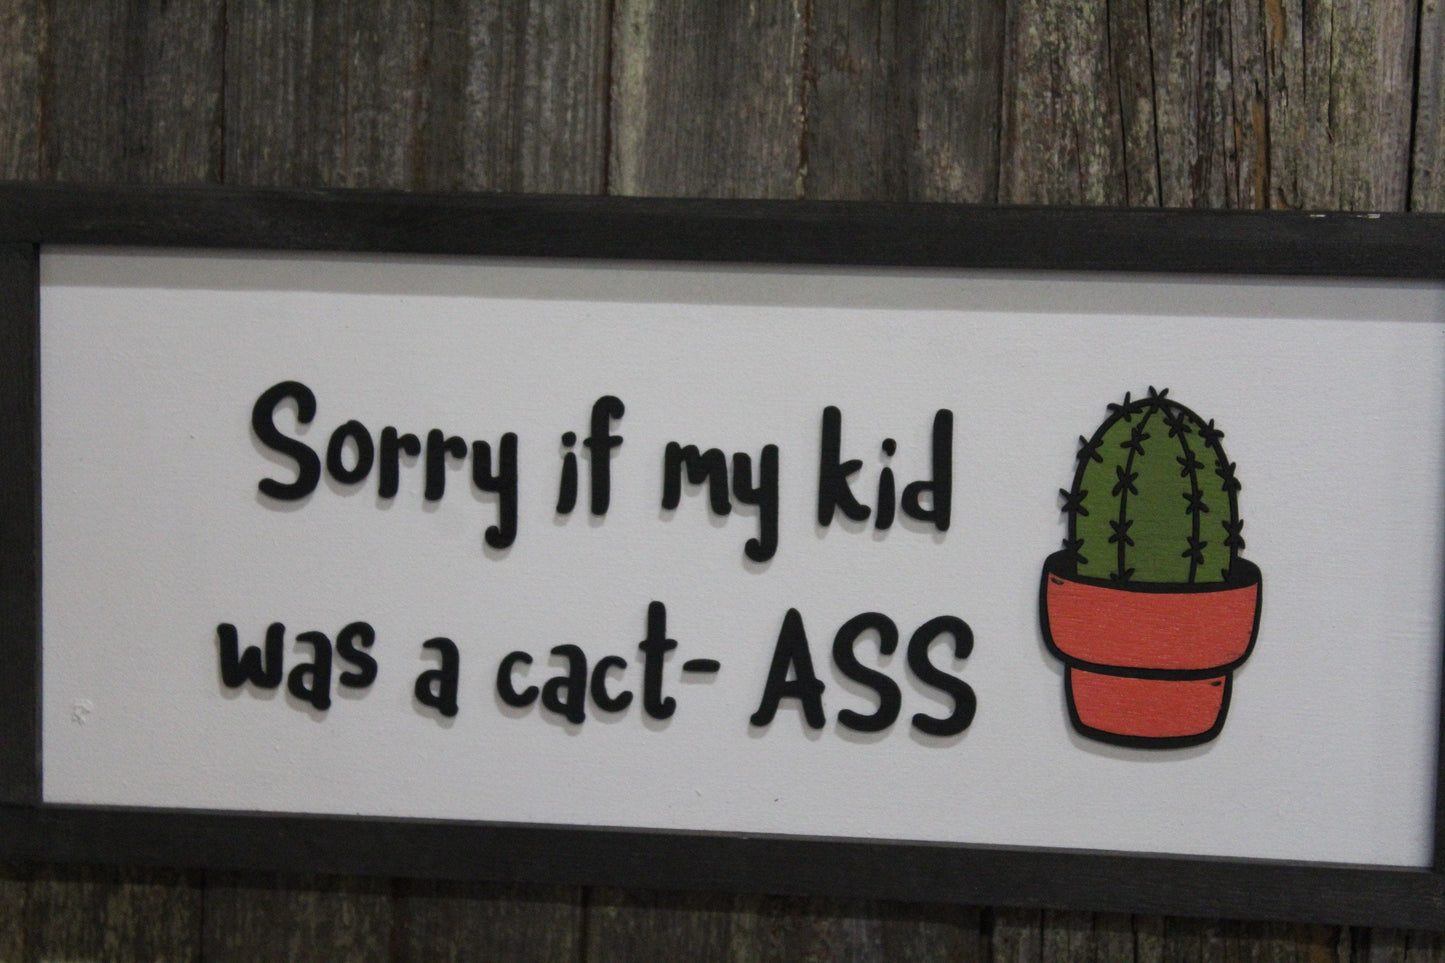 Sorry Cactus Funny Joke Sense of Humor Parenting Plant lover Prickly Crazy Kid Raised Text Kids Room Playroom Decor Home Apology 3D Handmade